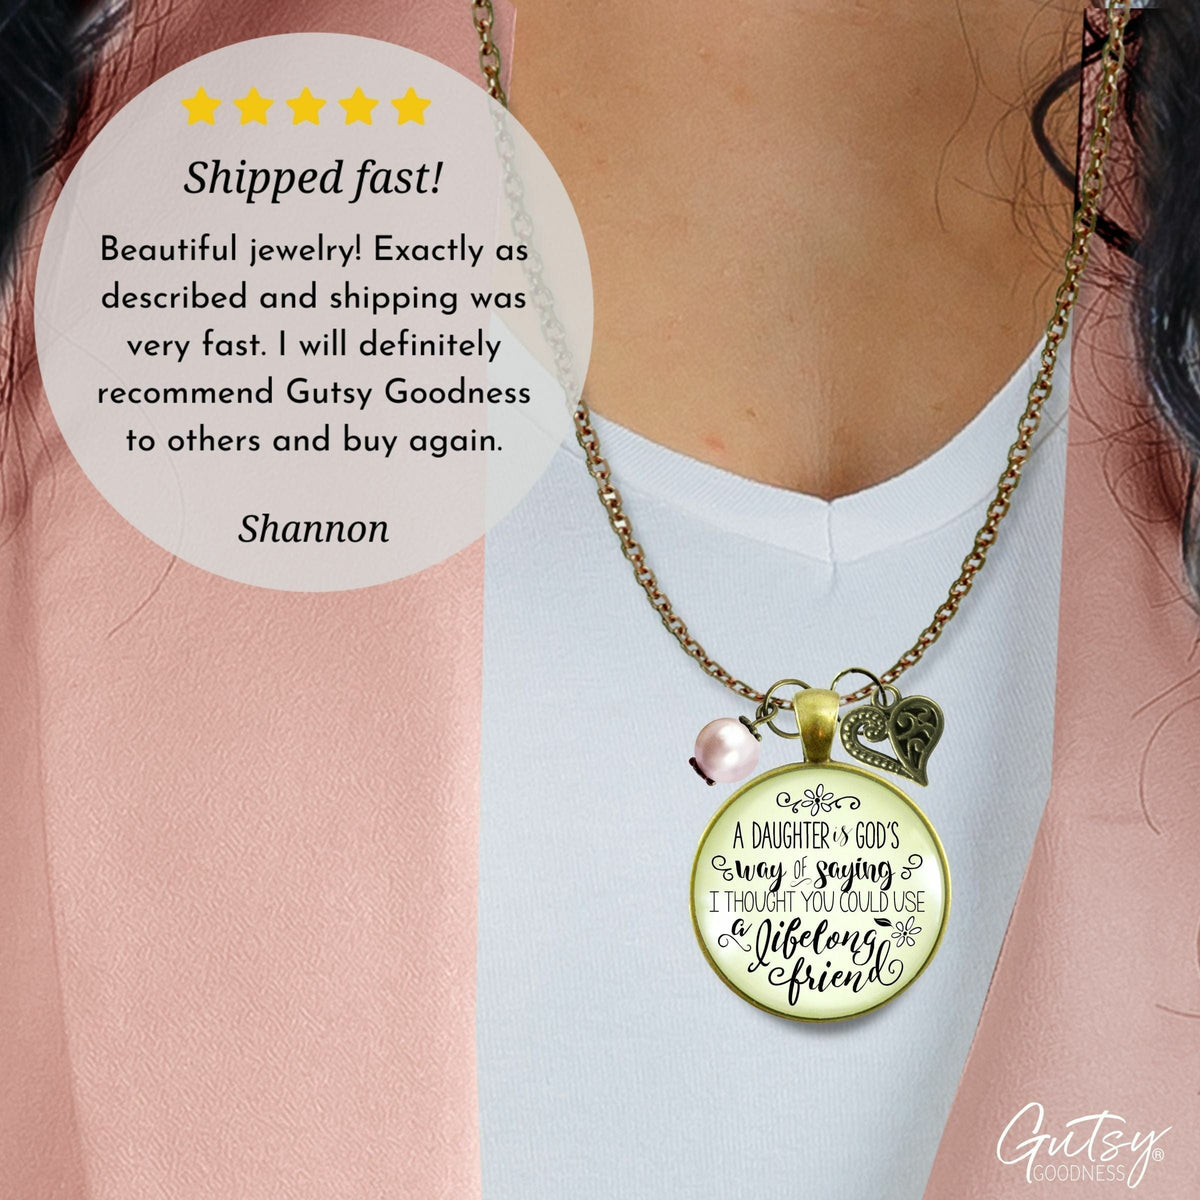 Gutsy Goodness Daughter Necklace From Mother Celebrate Friends Retro Inspire Jewelry Heart Gift - Gutsy Goodness;Daughter Necklace From Mother Celebrate Friends Retro Inspire Jewelry Heart Gift - Gutsy Goodness Handmade Jewelry Gifts